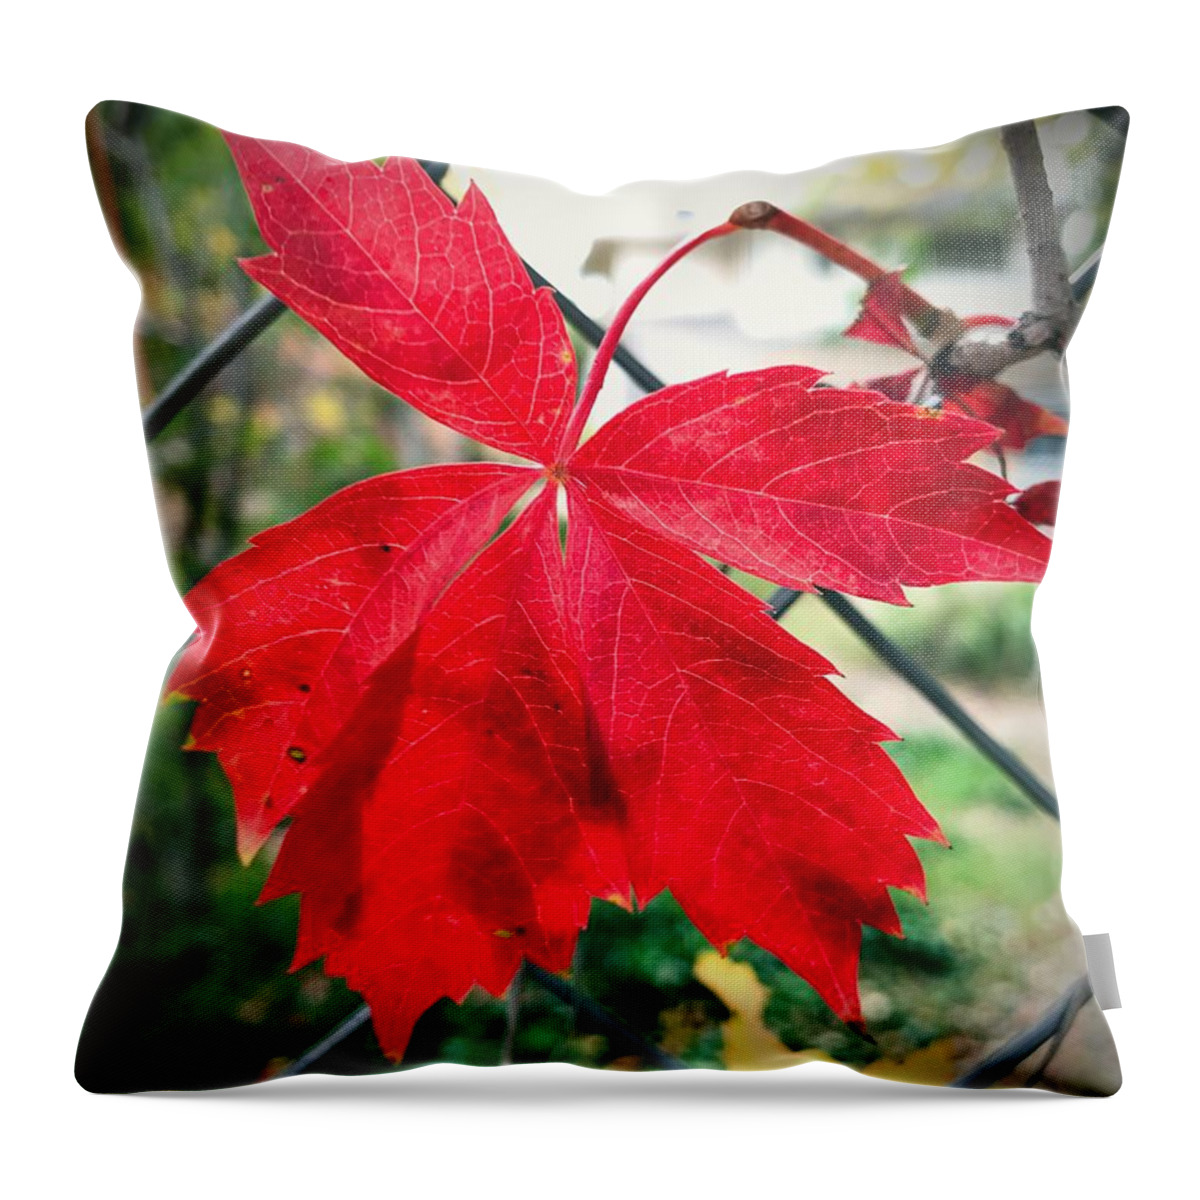 Autumn Throw Pillow featuring the photograph Autumn Red by Brad Hodges